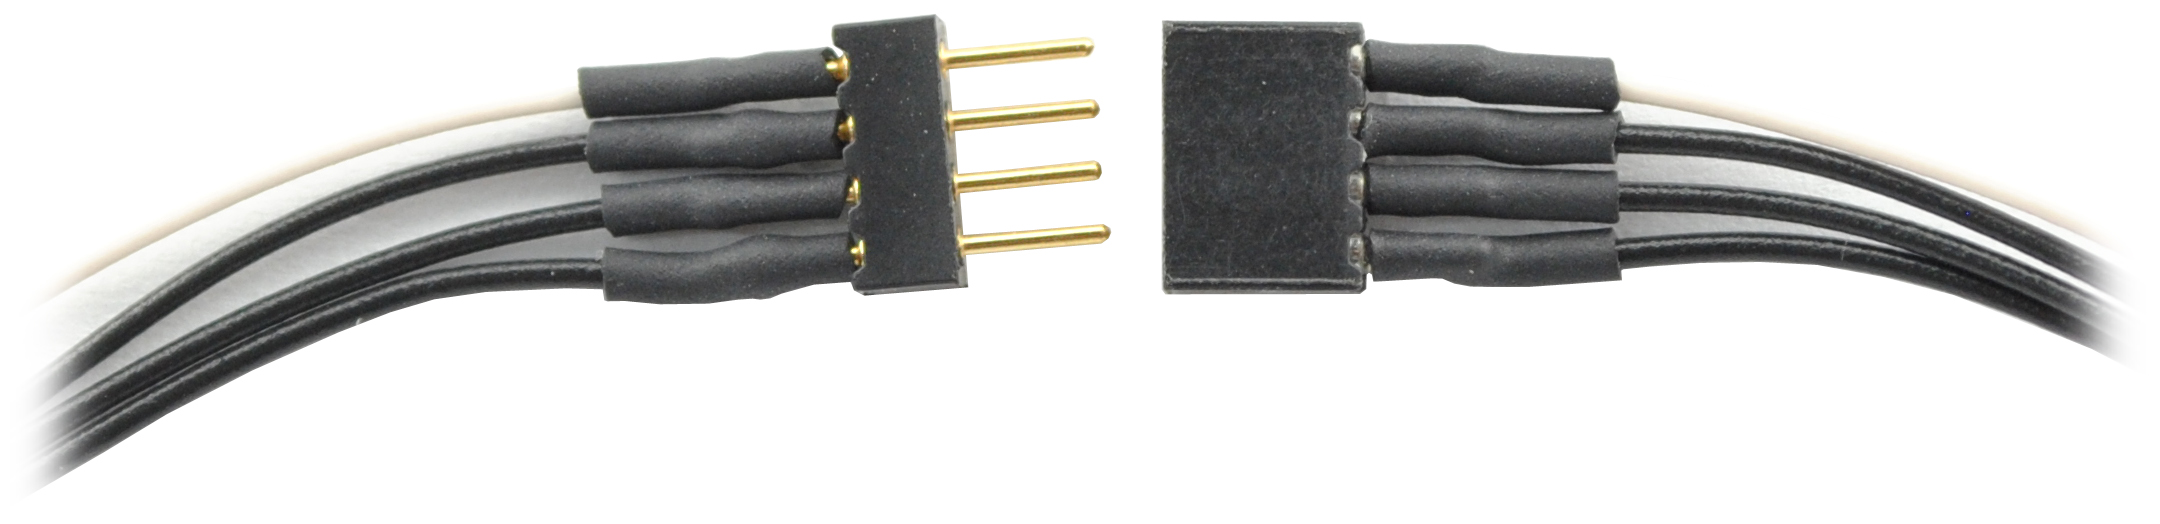 4-Pin Mini Connector (Black and White Wires)